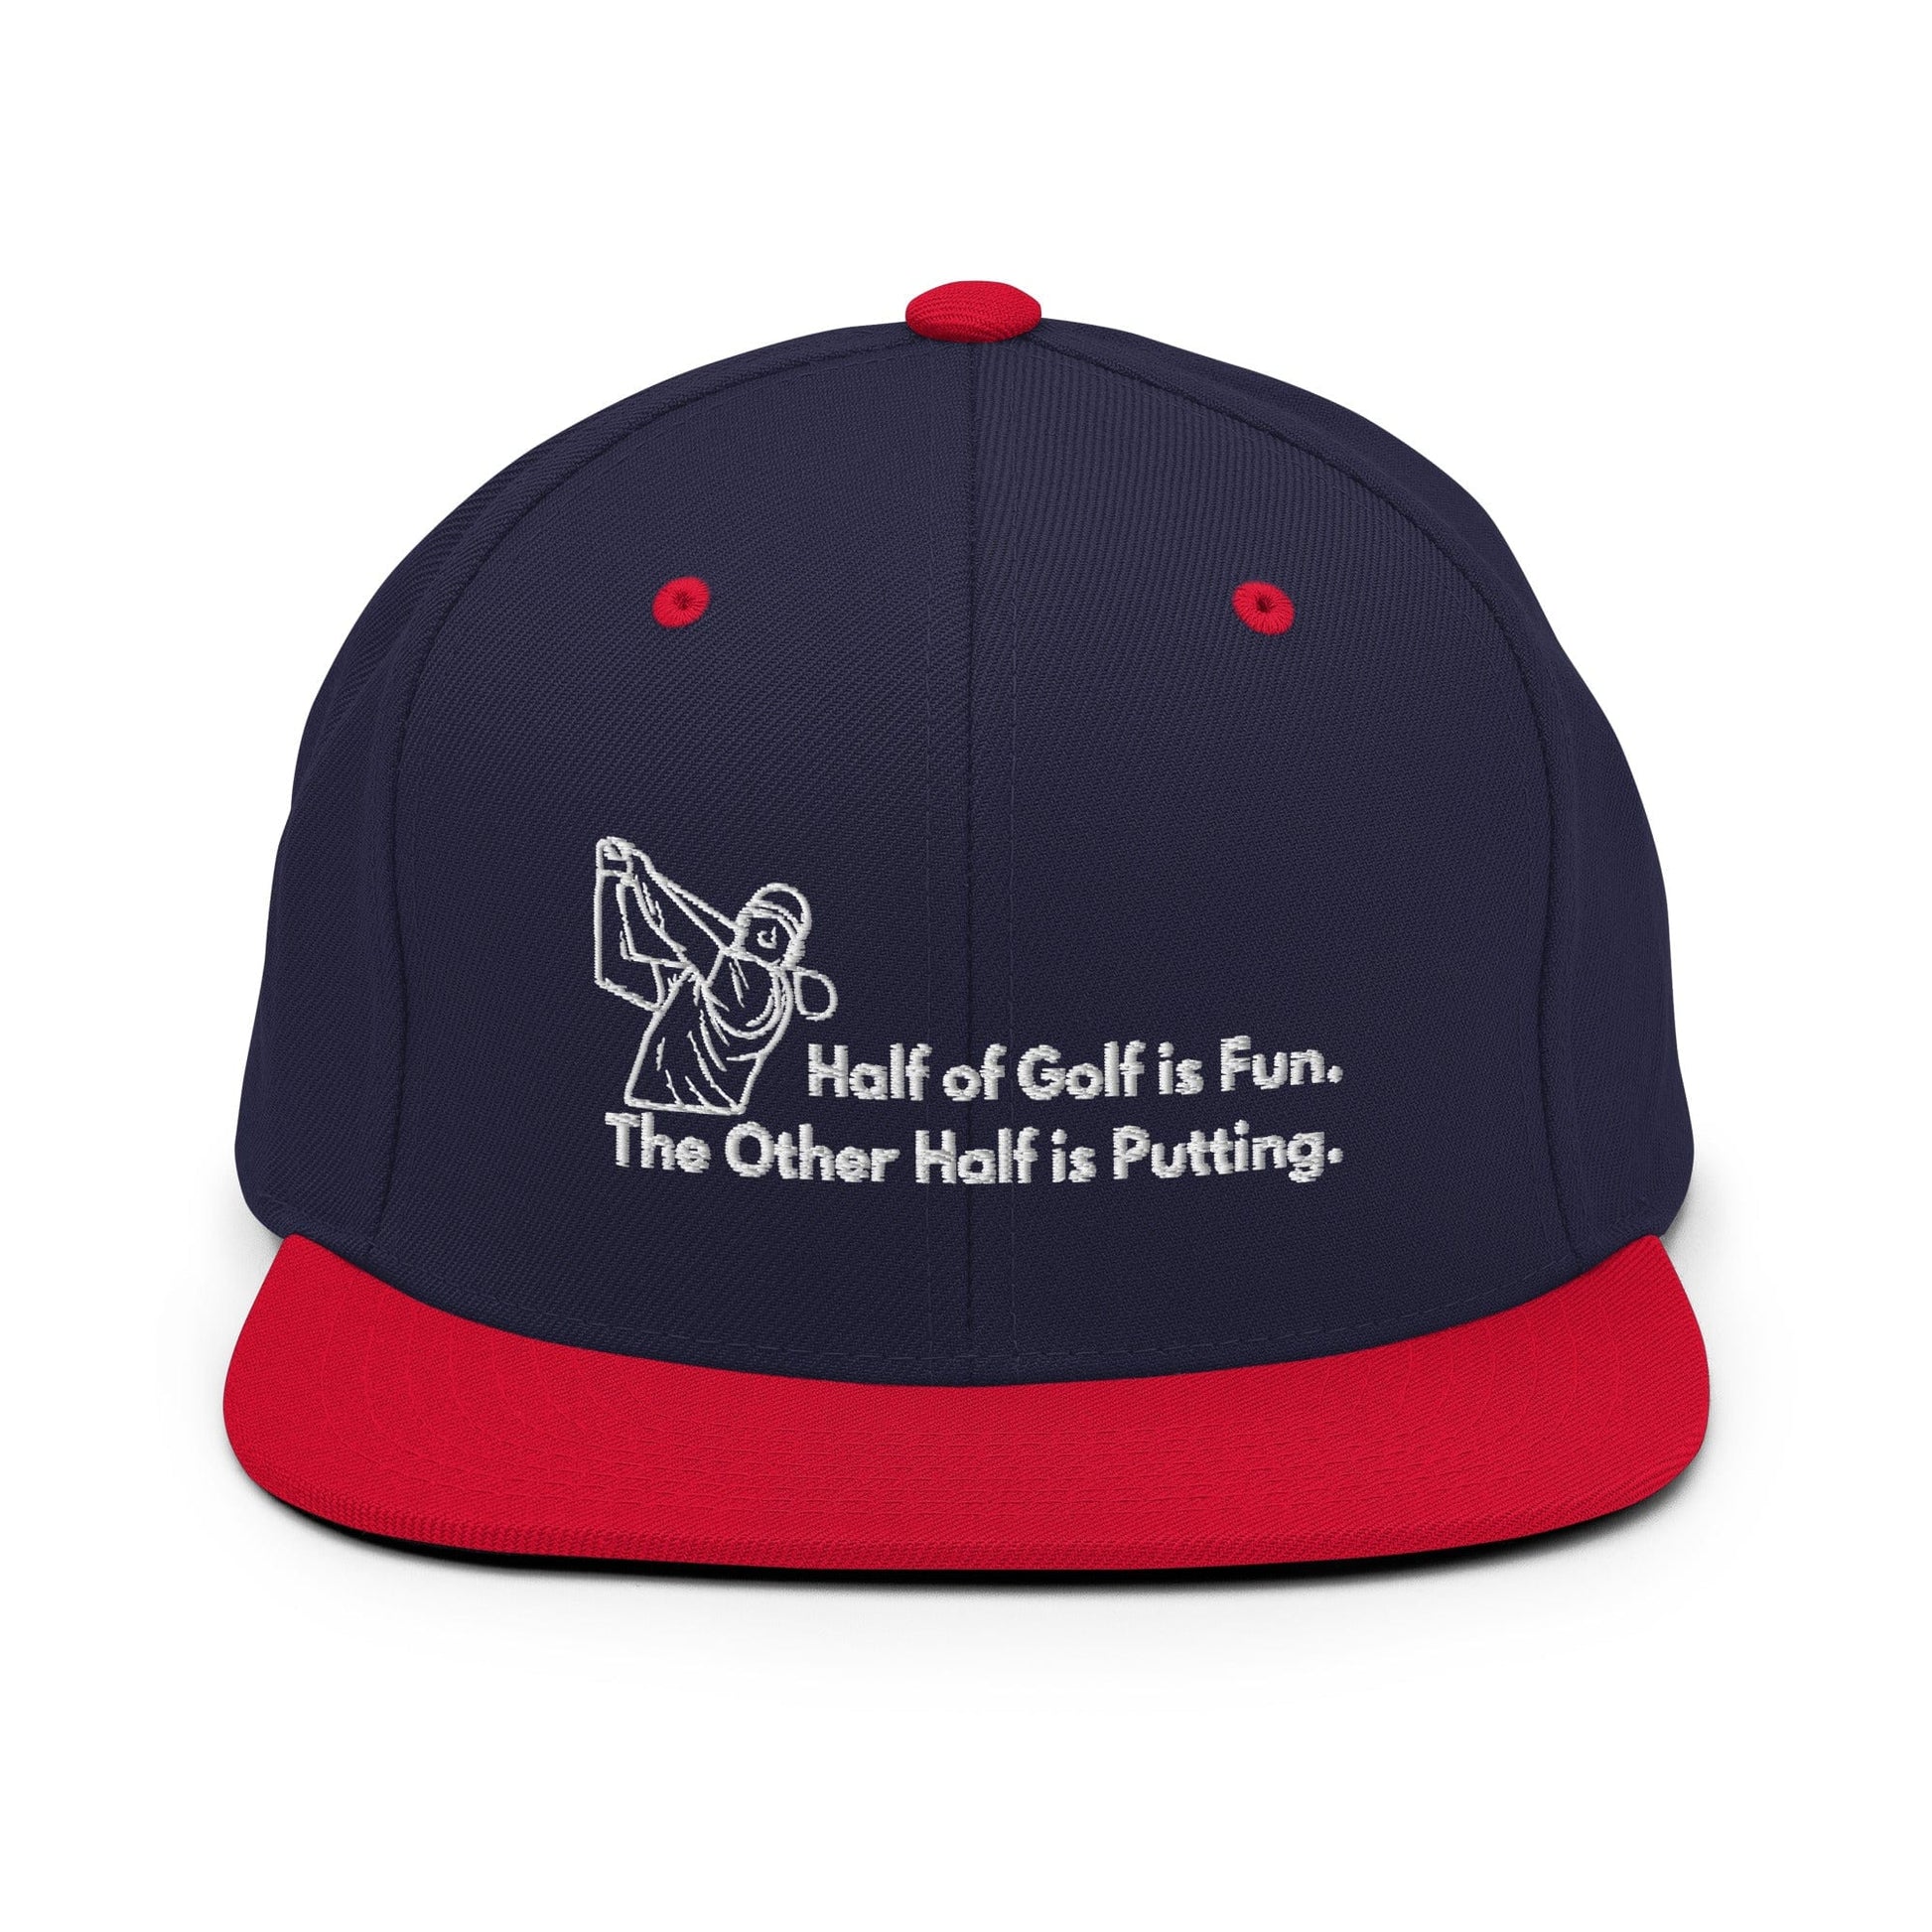 Funny Golfer Gifts  Snapback Hat Navy/ Red Half of Golf is Fun Snapback Hat